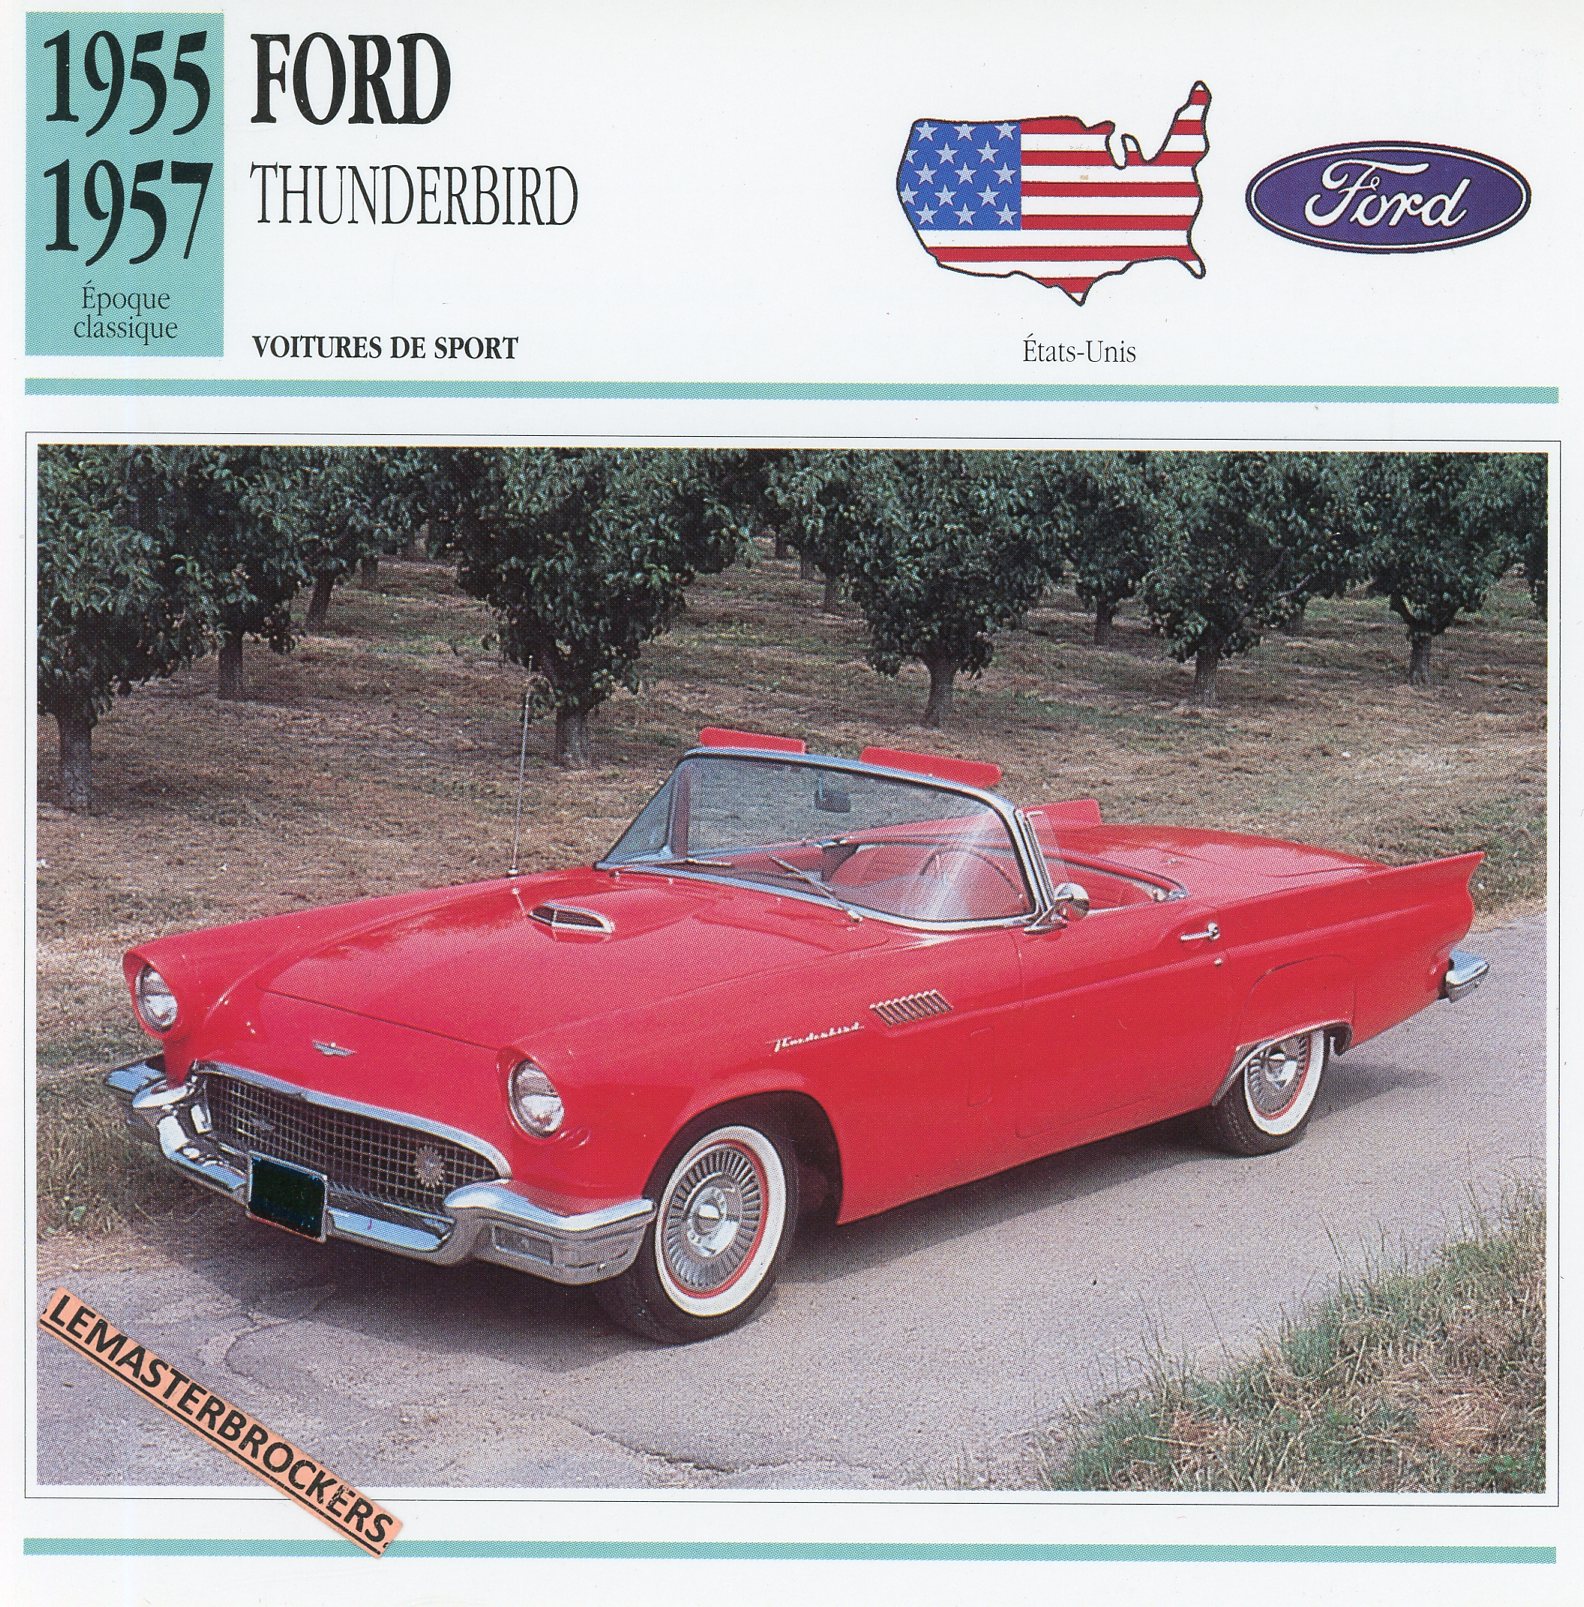 FORD THUNDERBIRD 1955 1957 - FICHE AUTO - CARD CARS ATLAS FRENCH